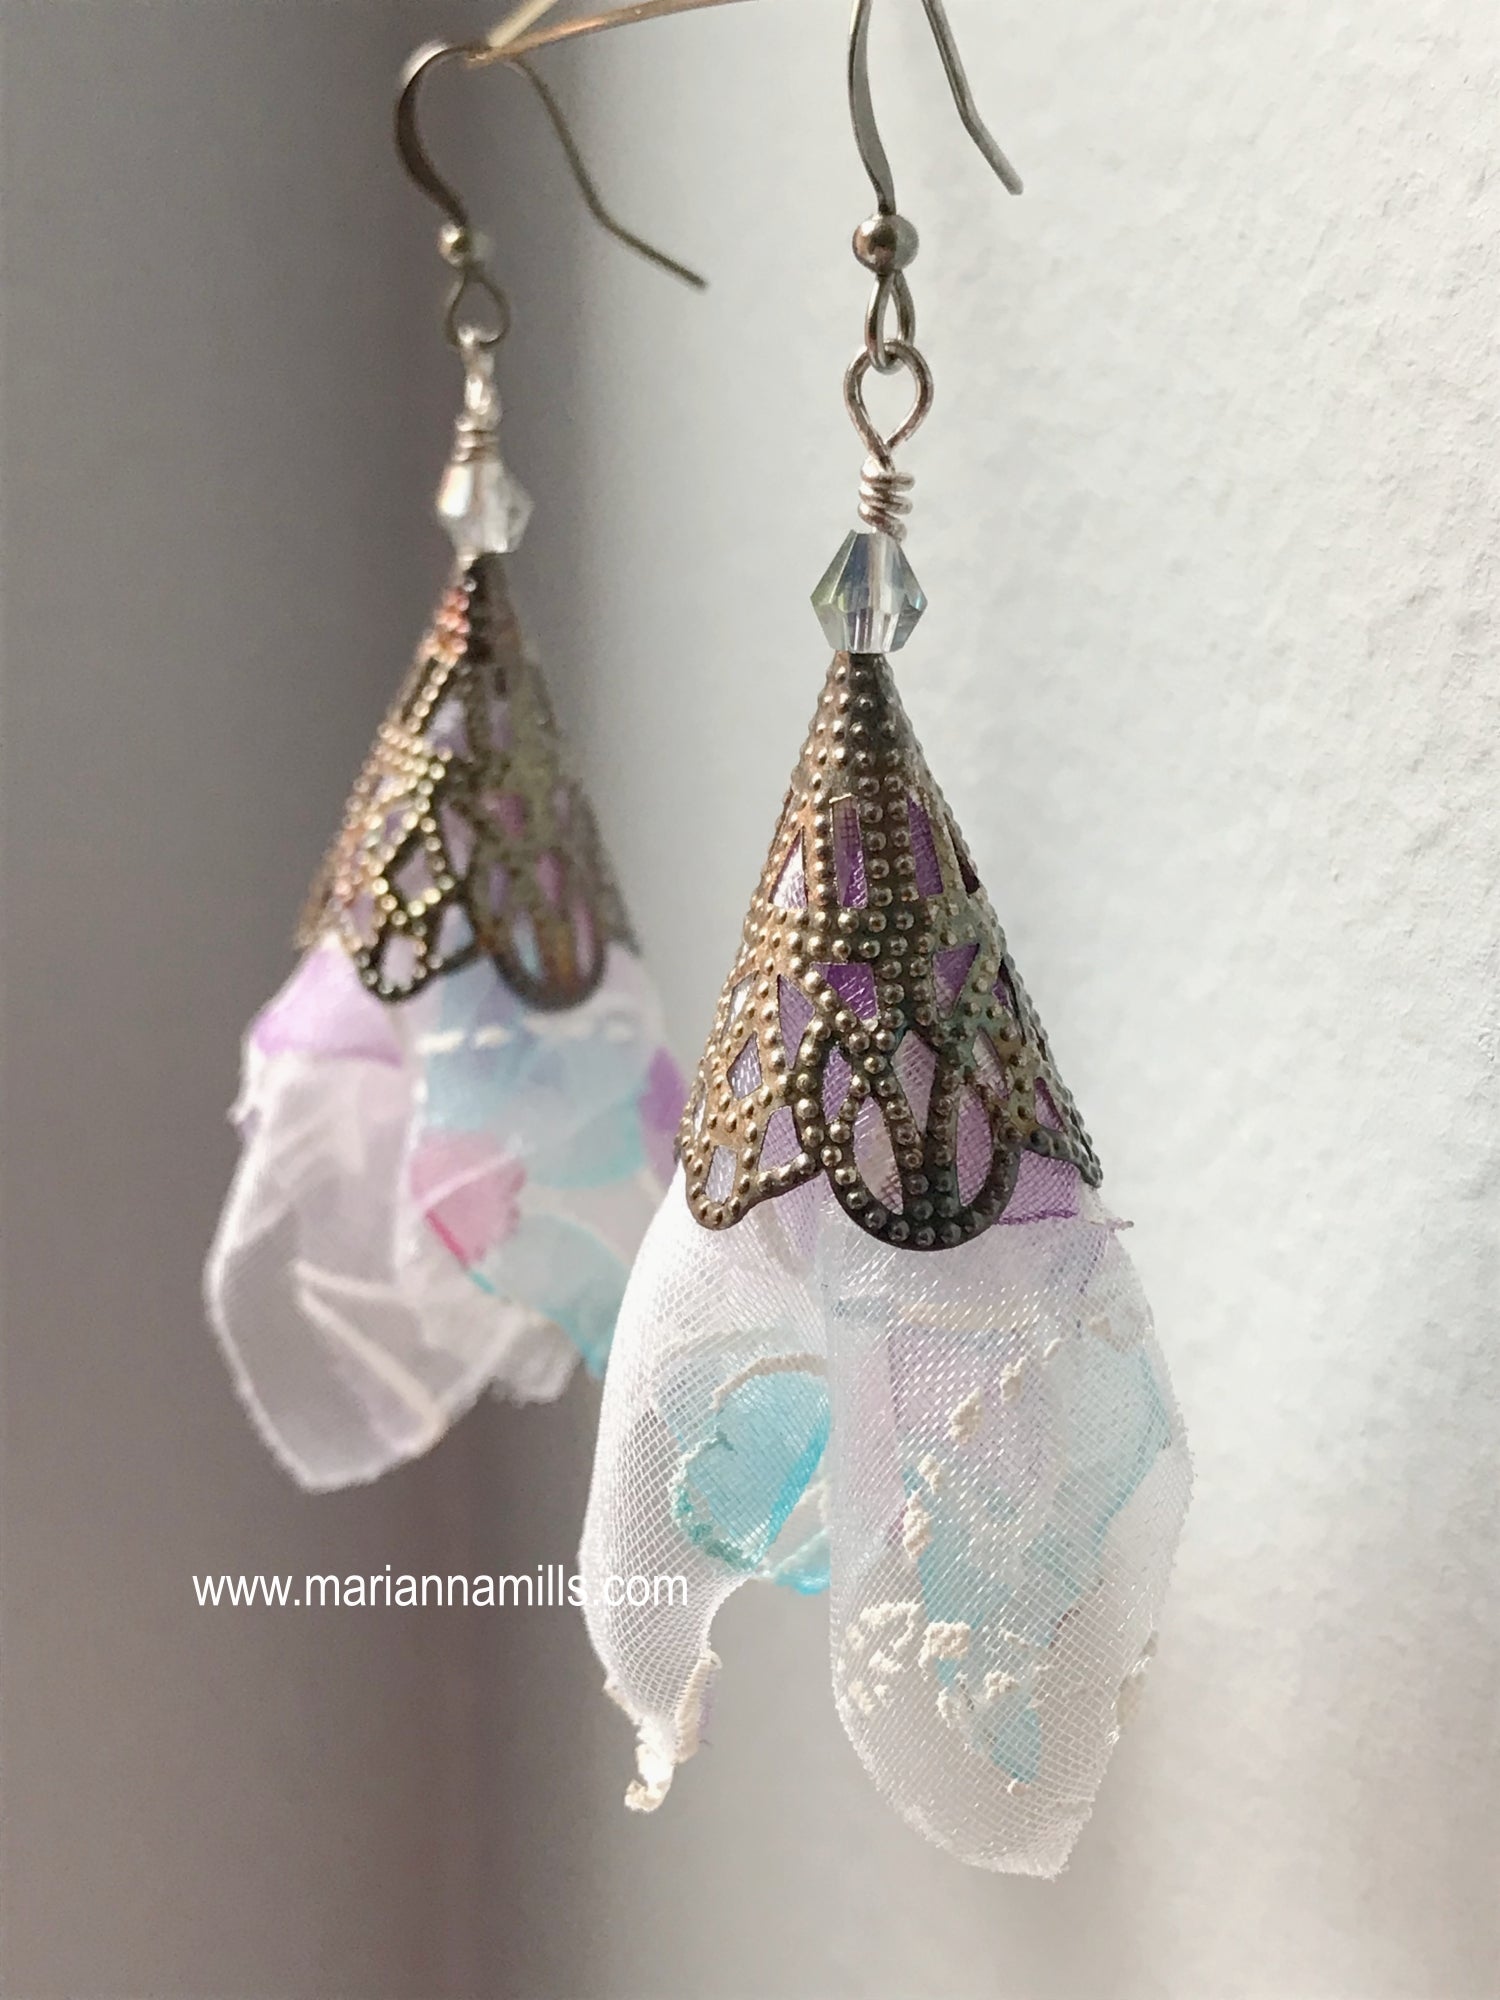 Floral Organza Fiber Art Earrings - Designed and Handmade by Marianna Mills